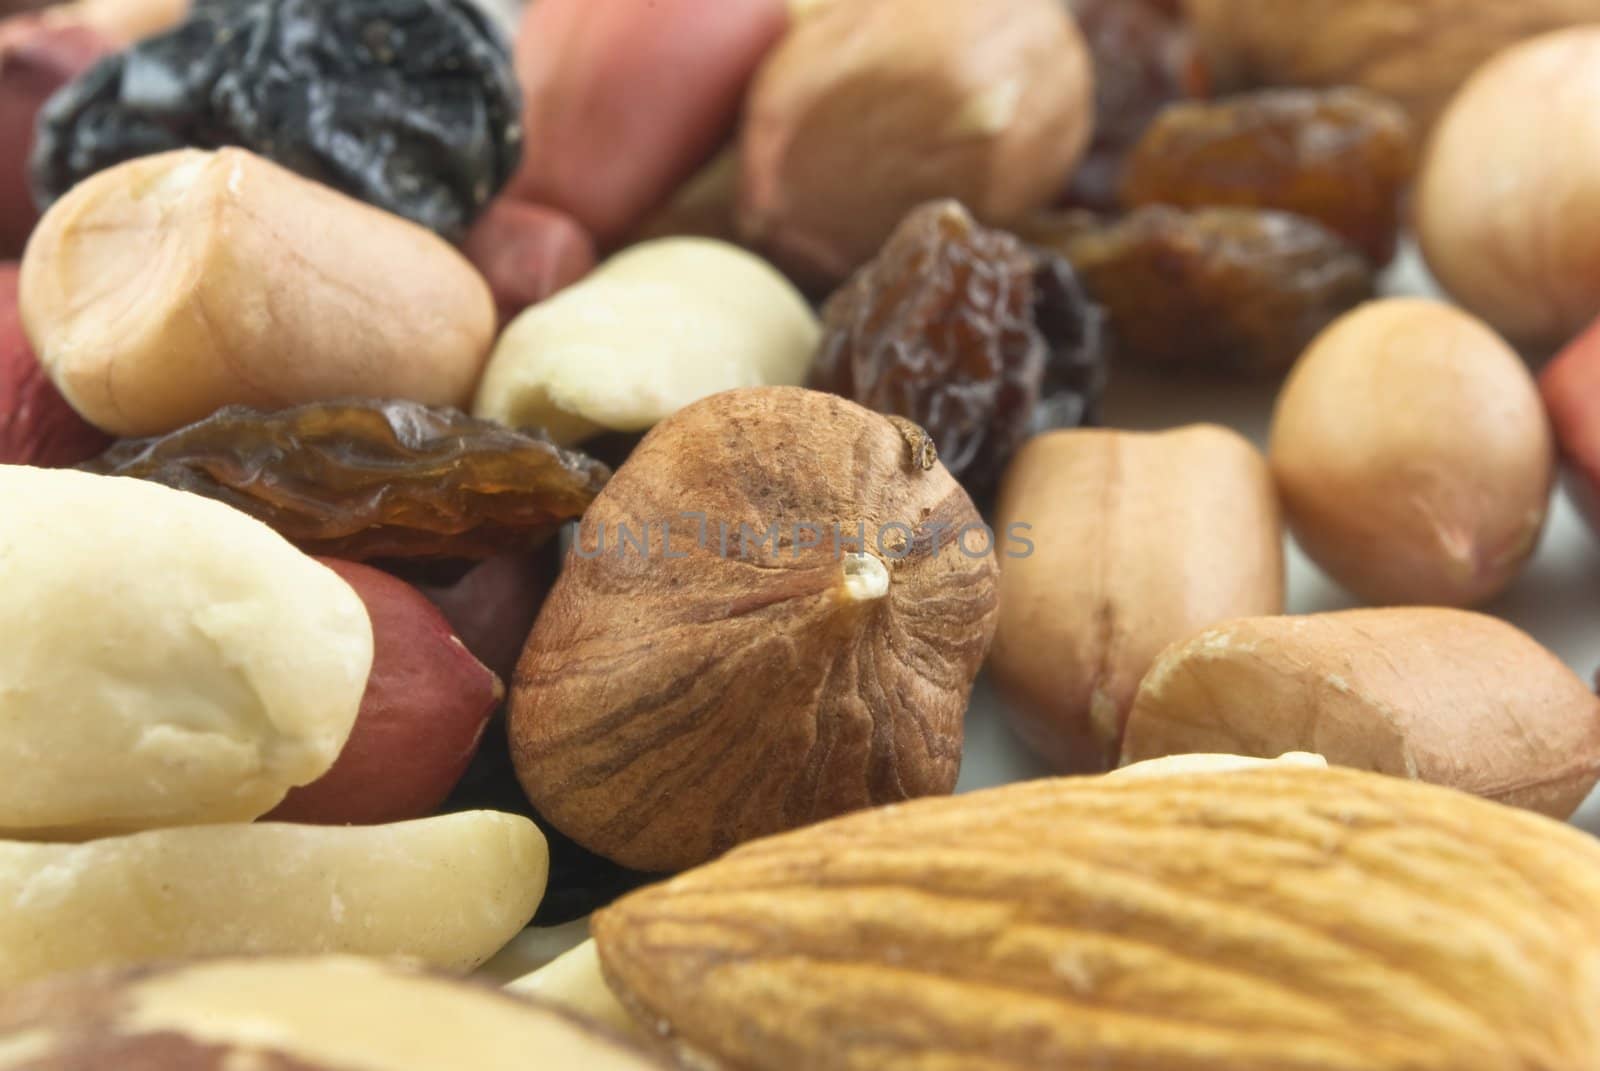 Close-up of mixed shelled nuts and raisins on a white plate.  Includes hazelnuts, peanuts, almonds and raisins.